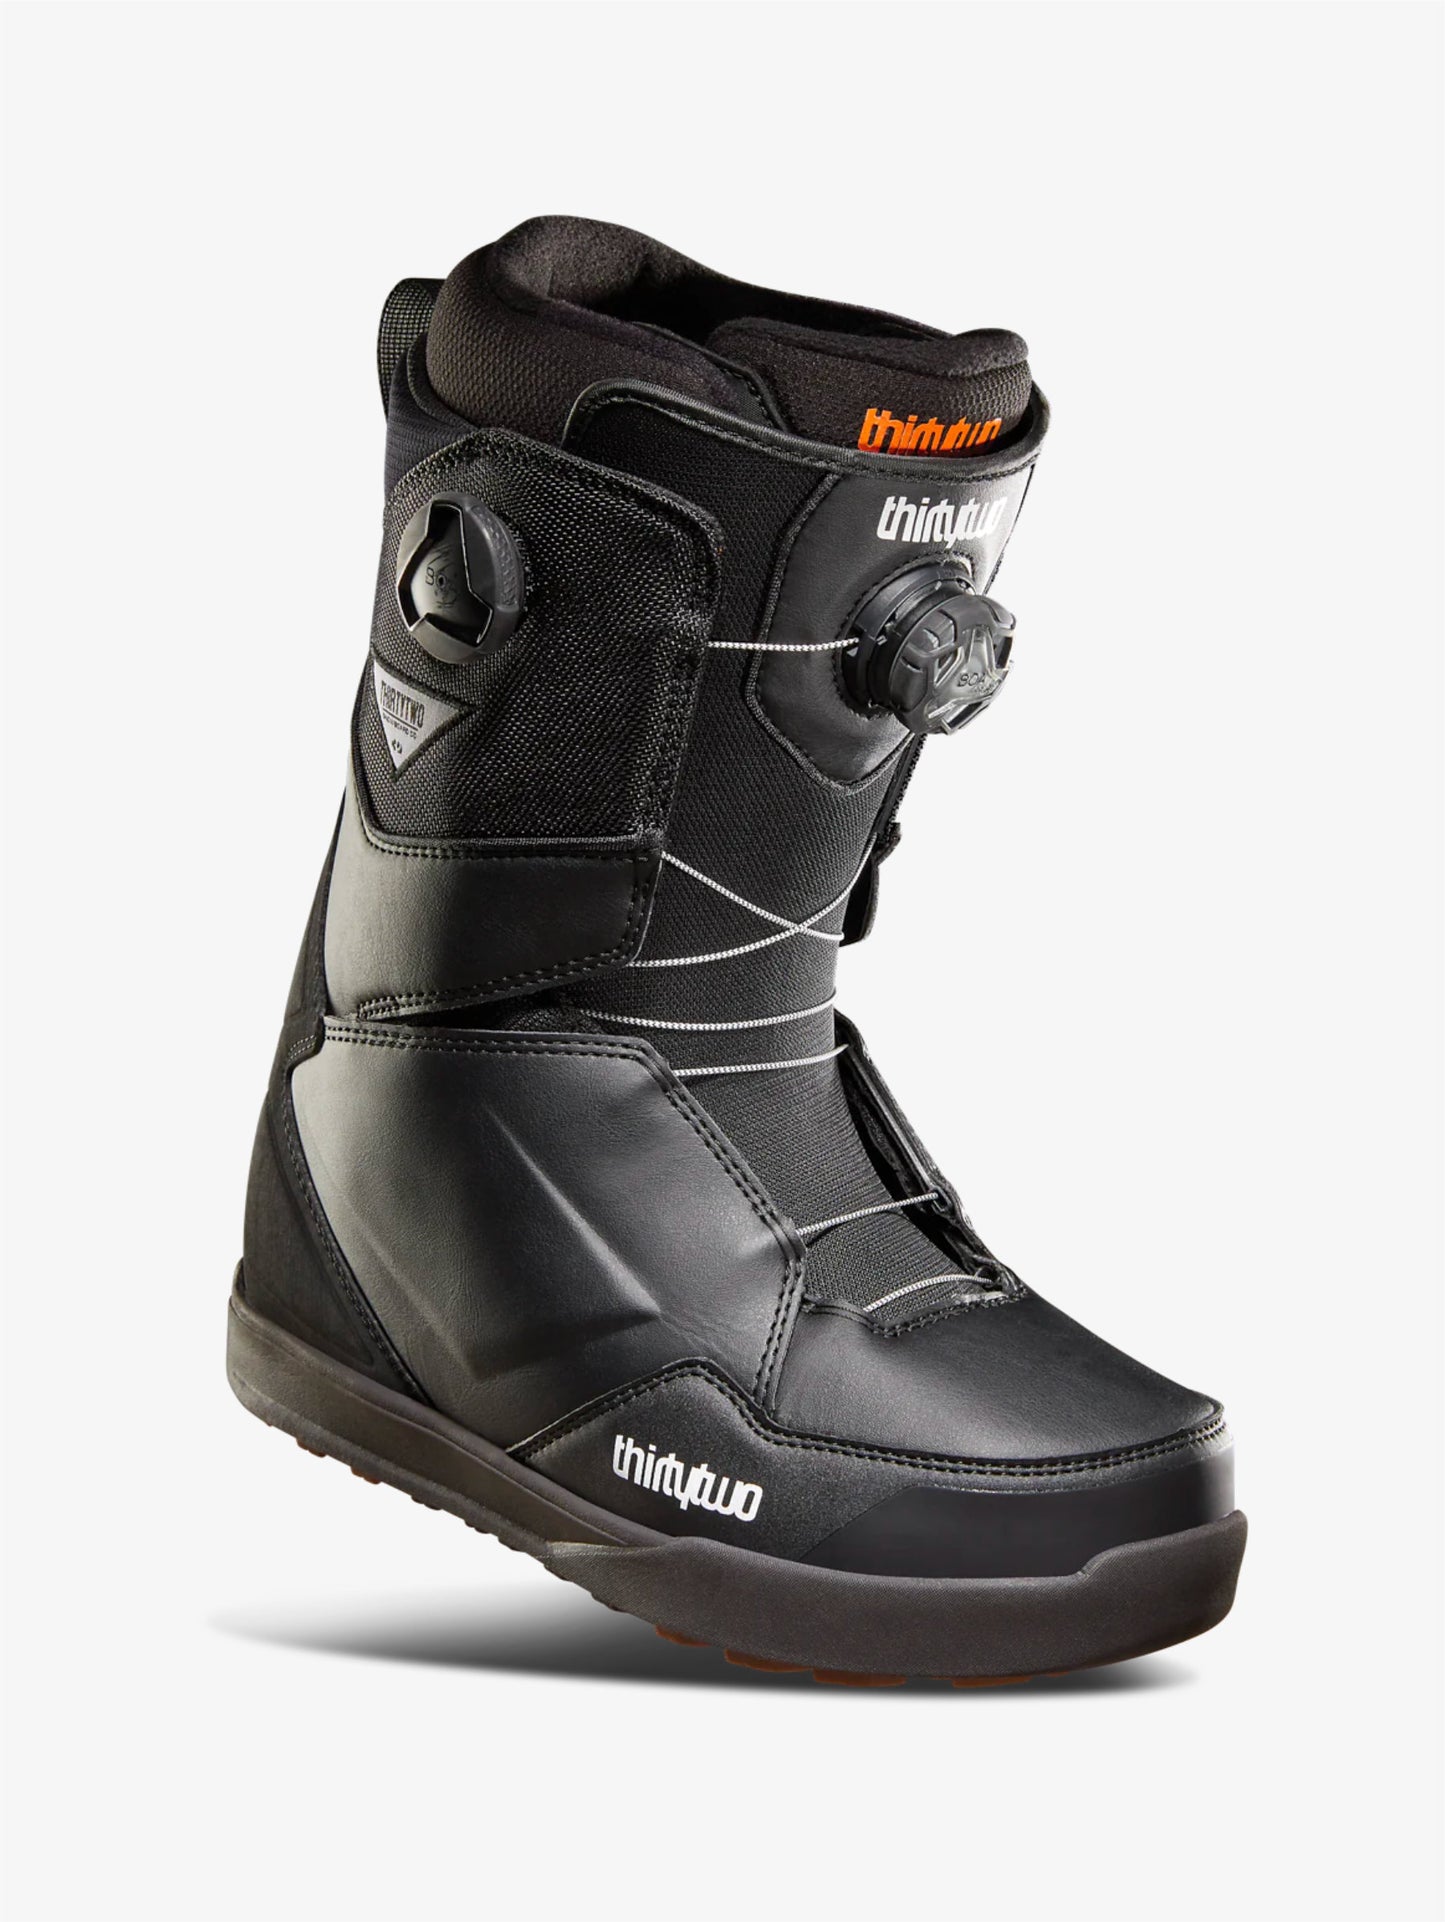 Lashed Double Boa snowboard boots black